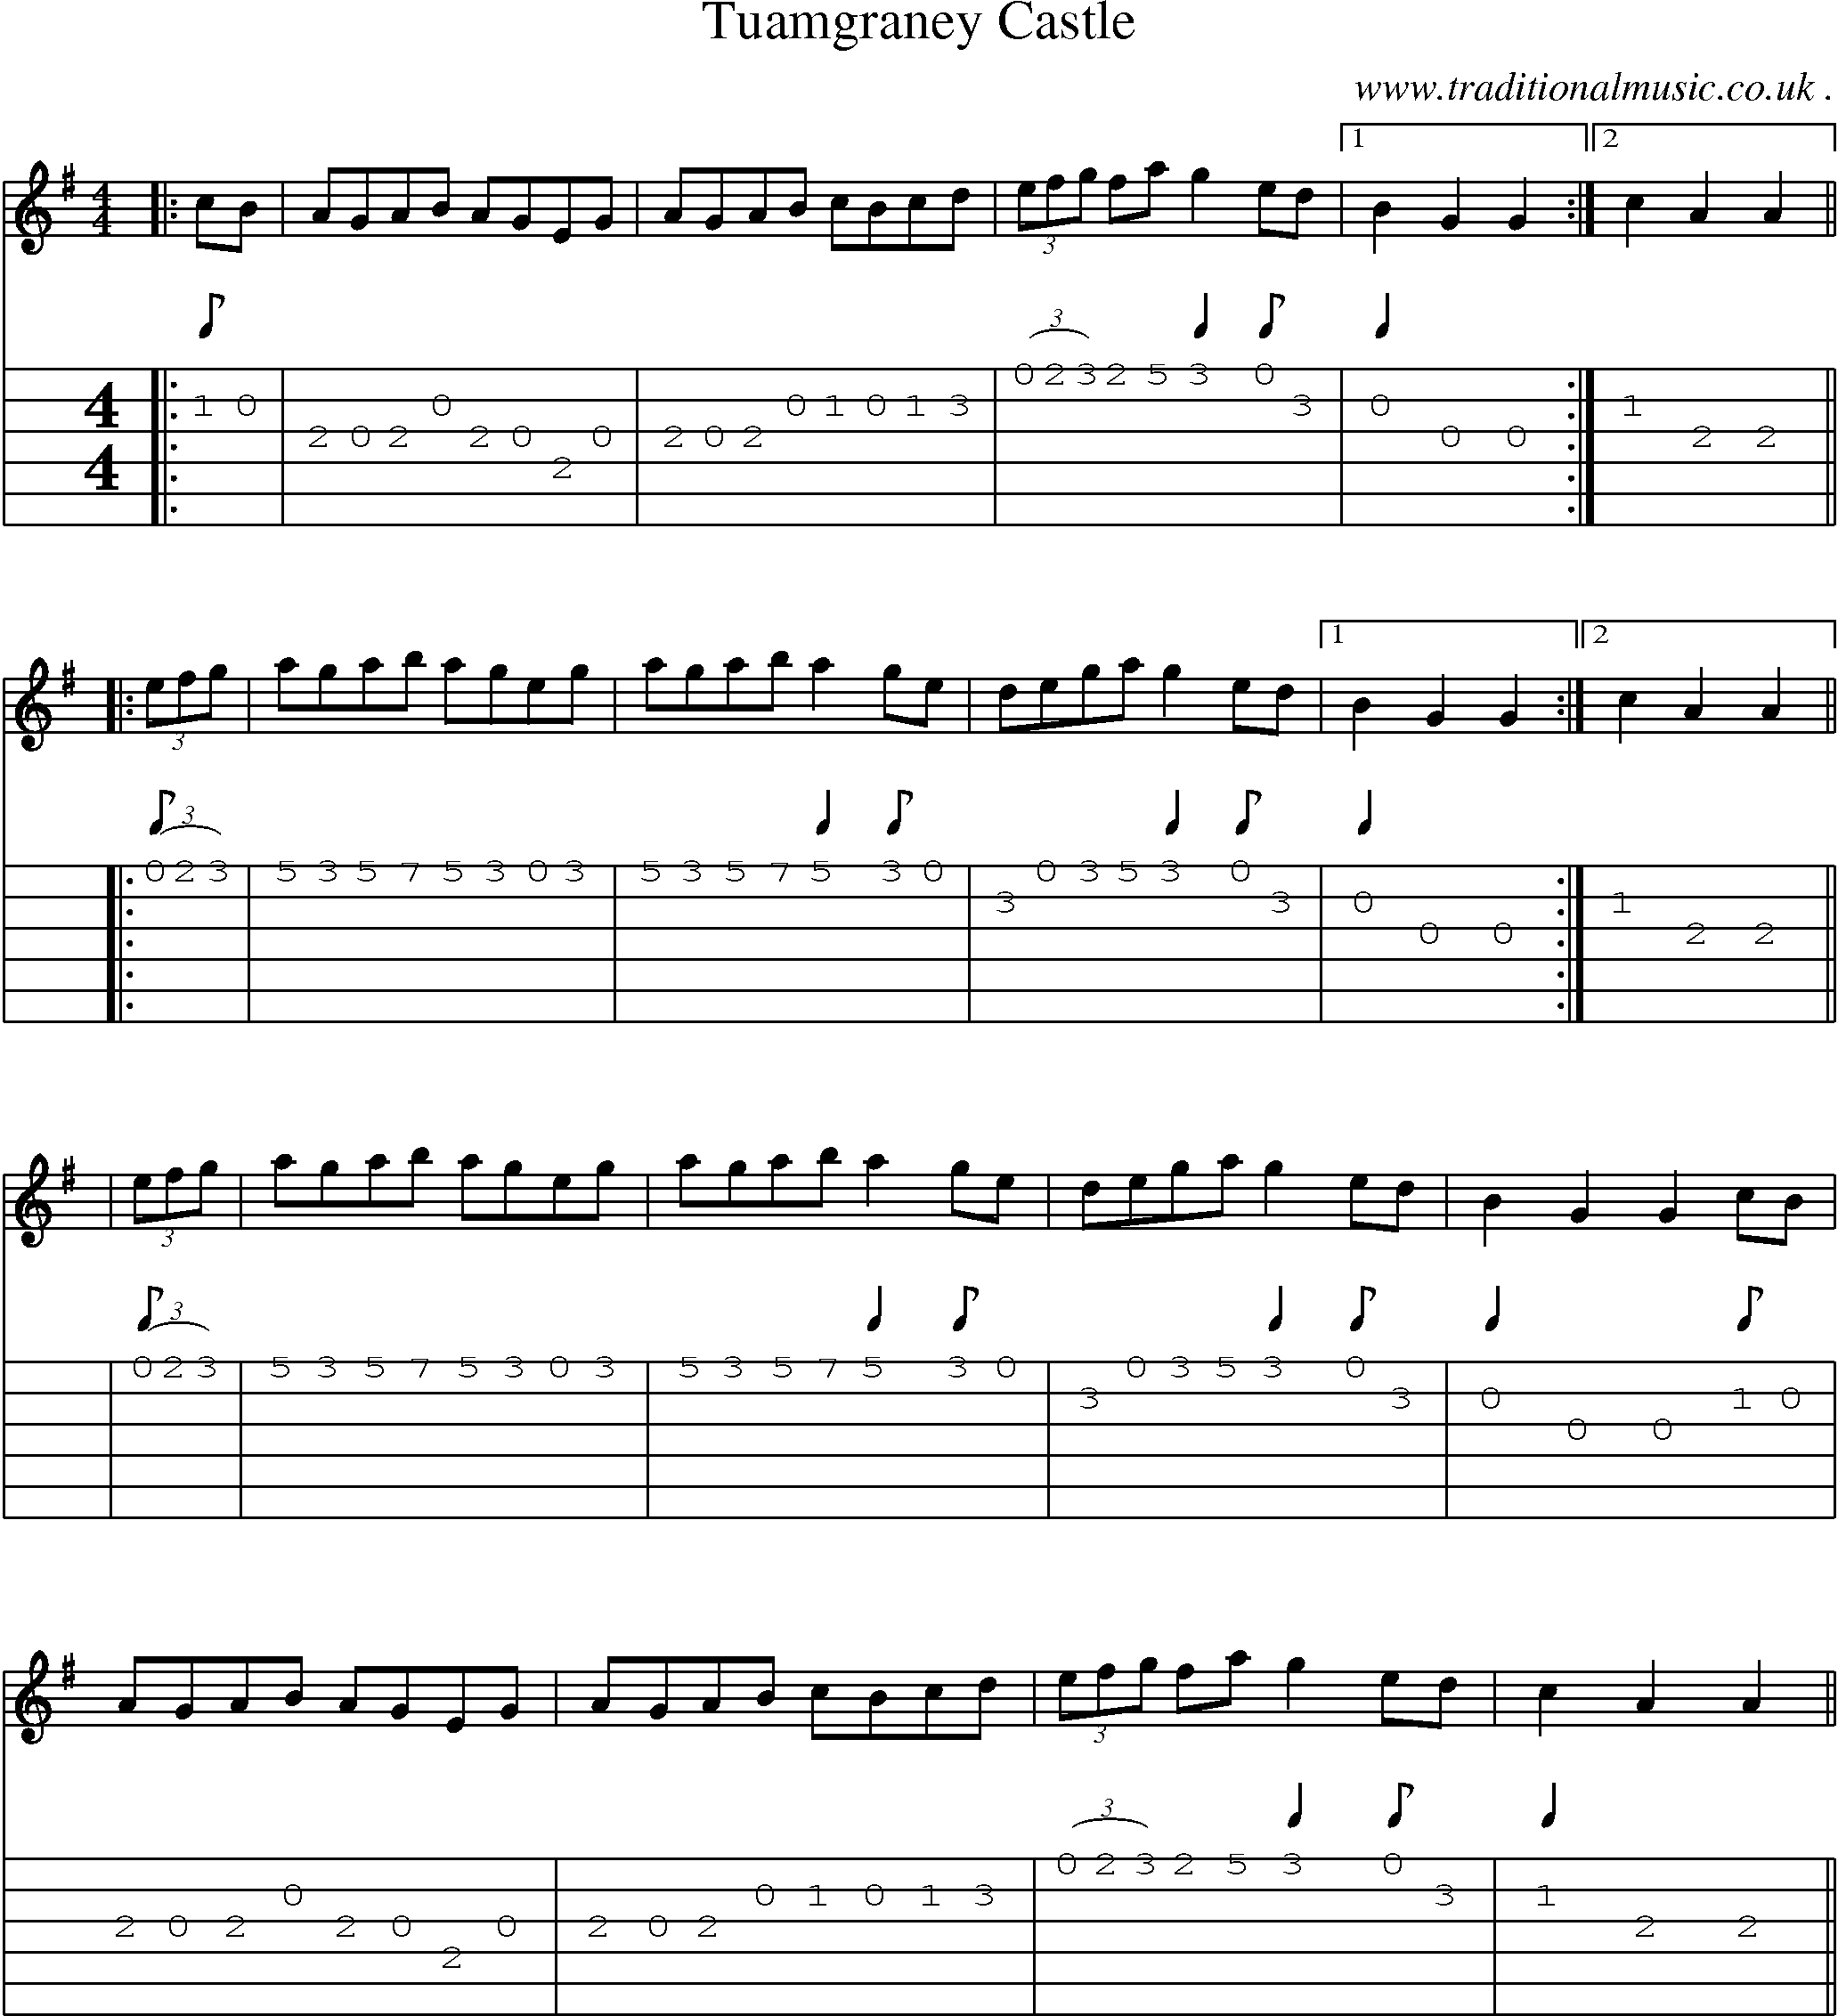 Sheet-Music and Guitar Tabs for Tuamgraney Castle